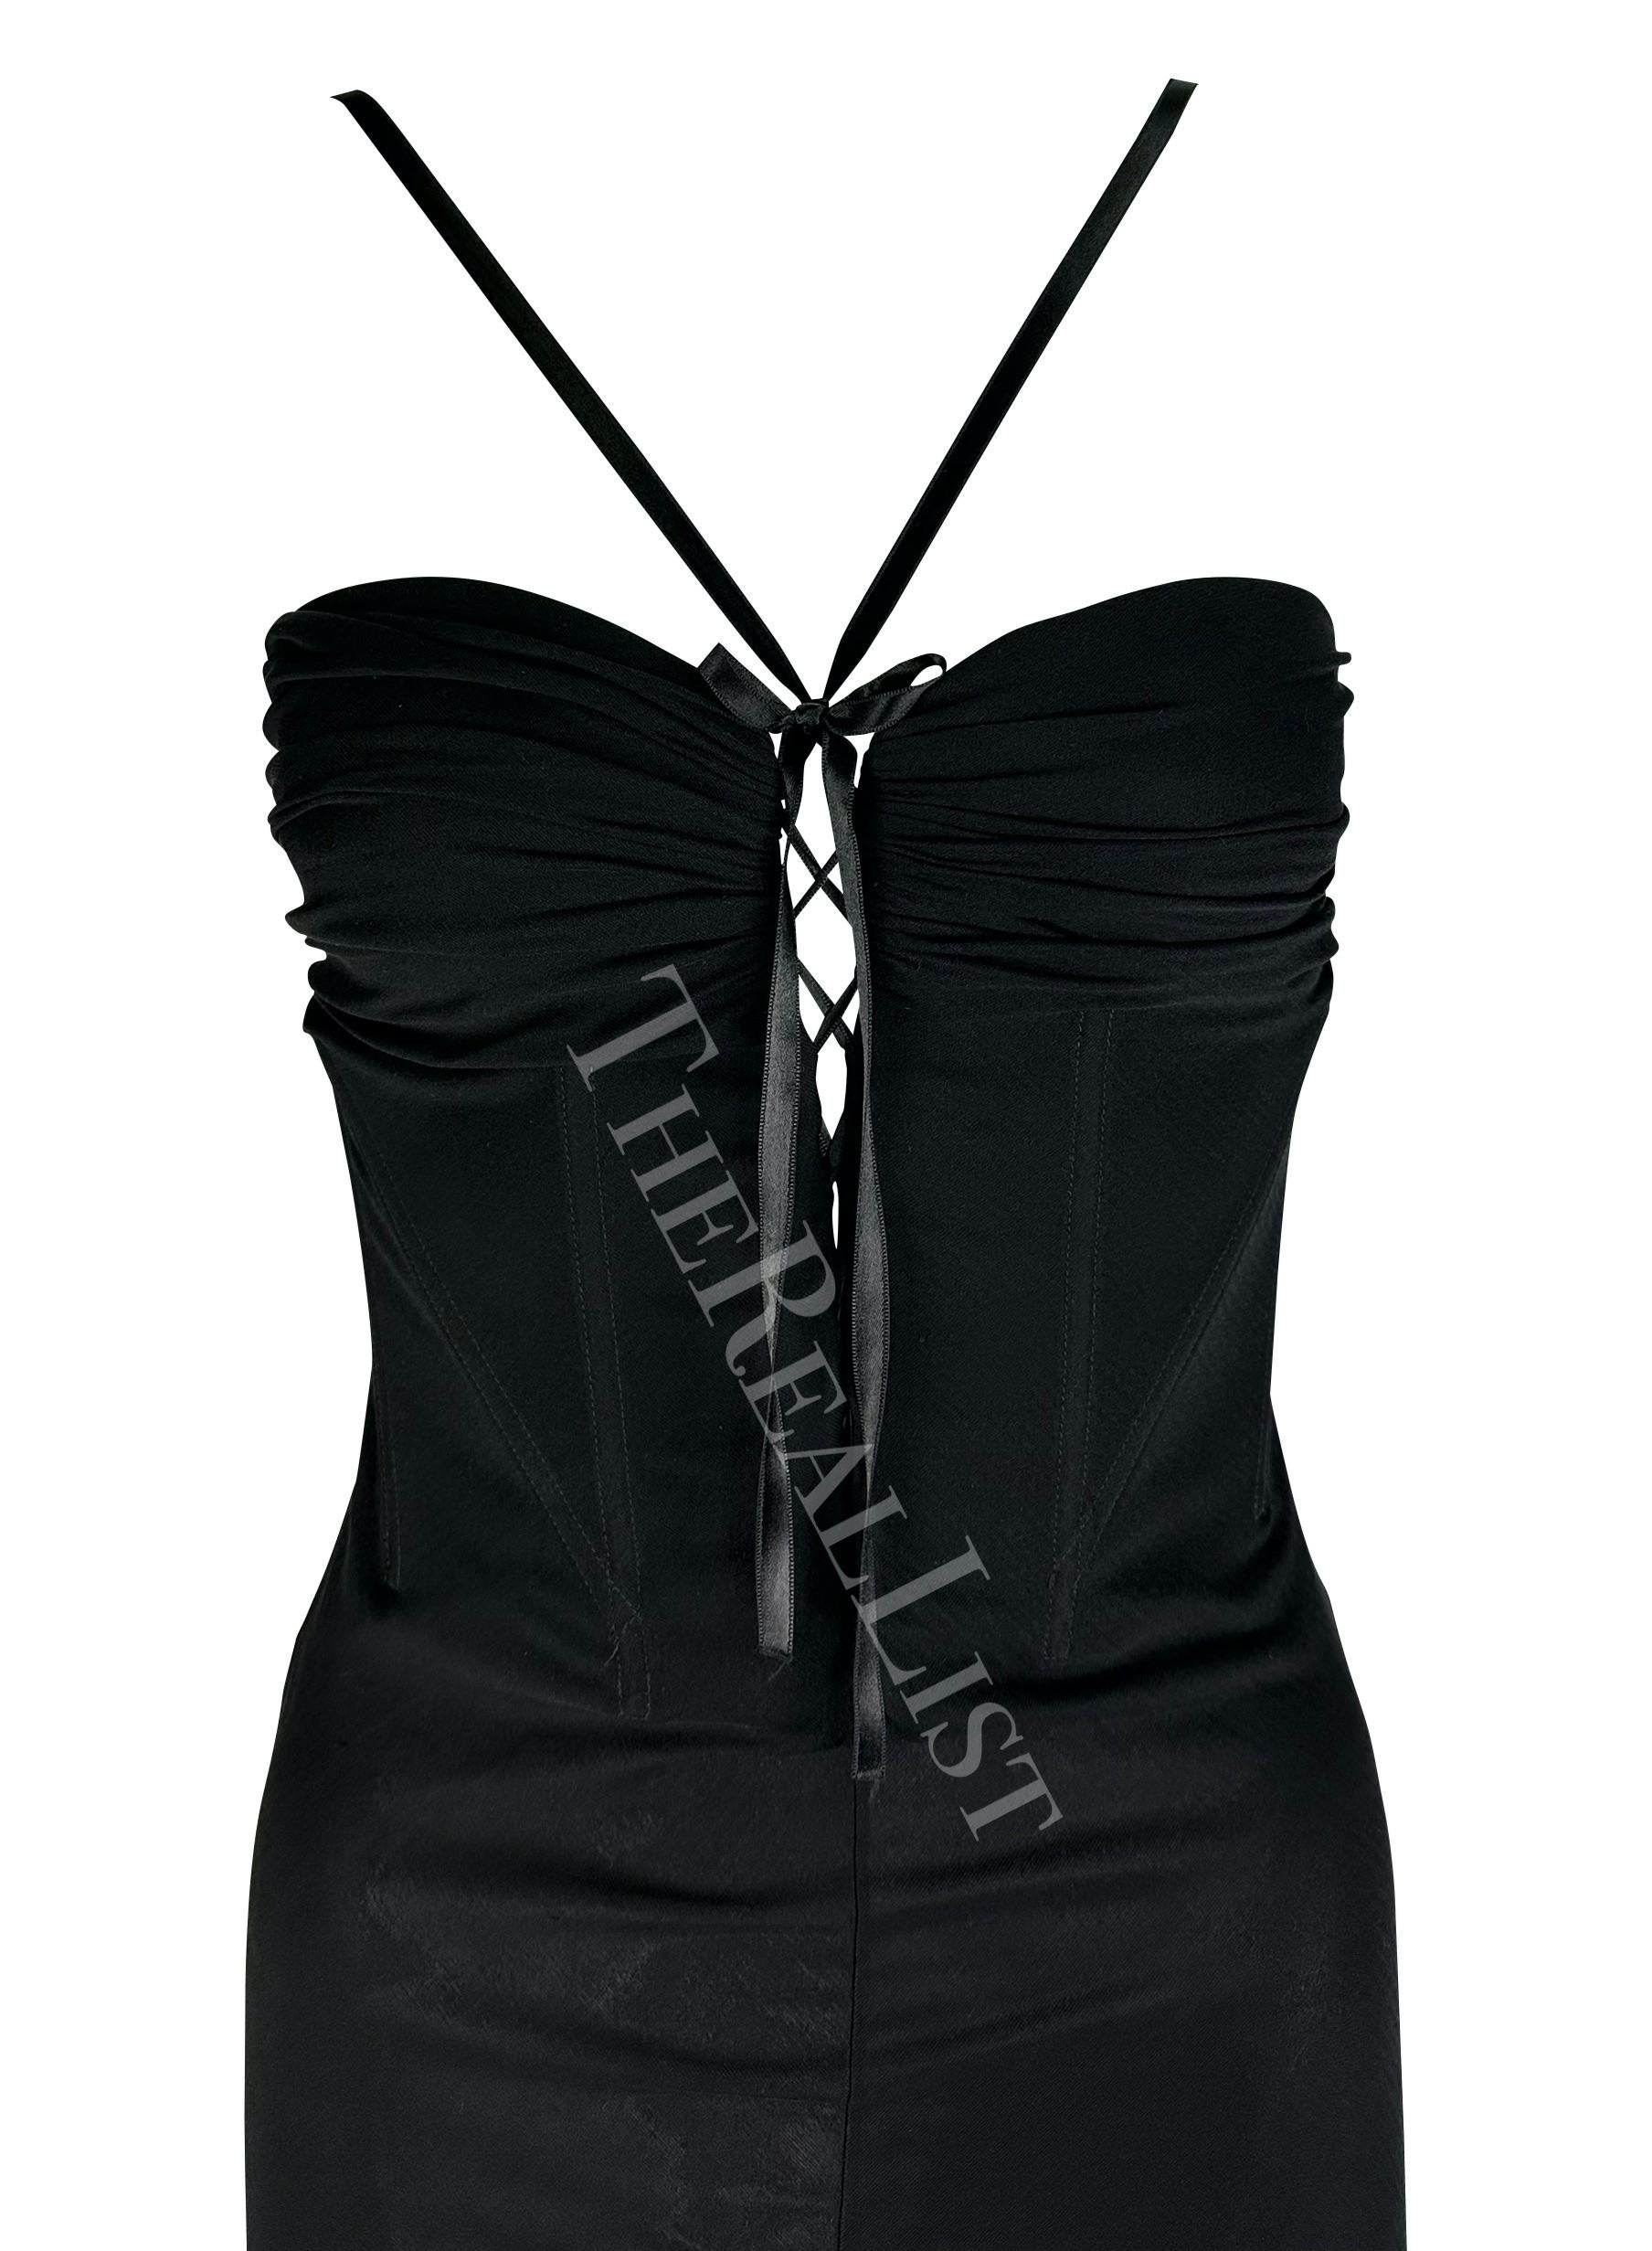 Presenting a beautiful black Emanuel Ungaro gown. From the early 2000s, this semi-sheer gown is perfectly feminine and sexy. The dress features a plunging neckline, with a lace-up detail between the breasts, an internal corset, and a symmetric